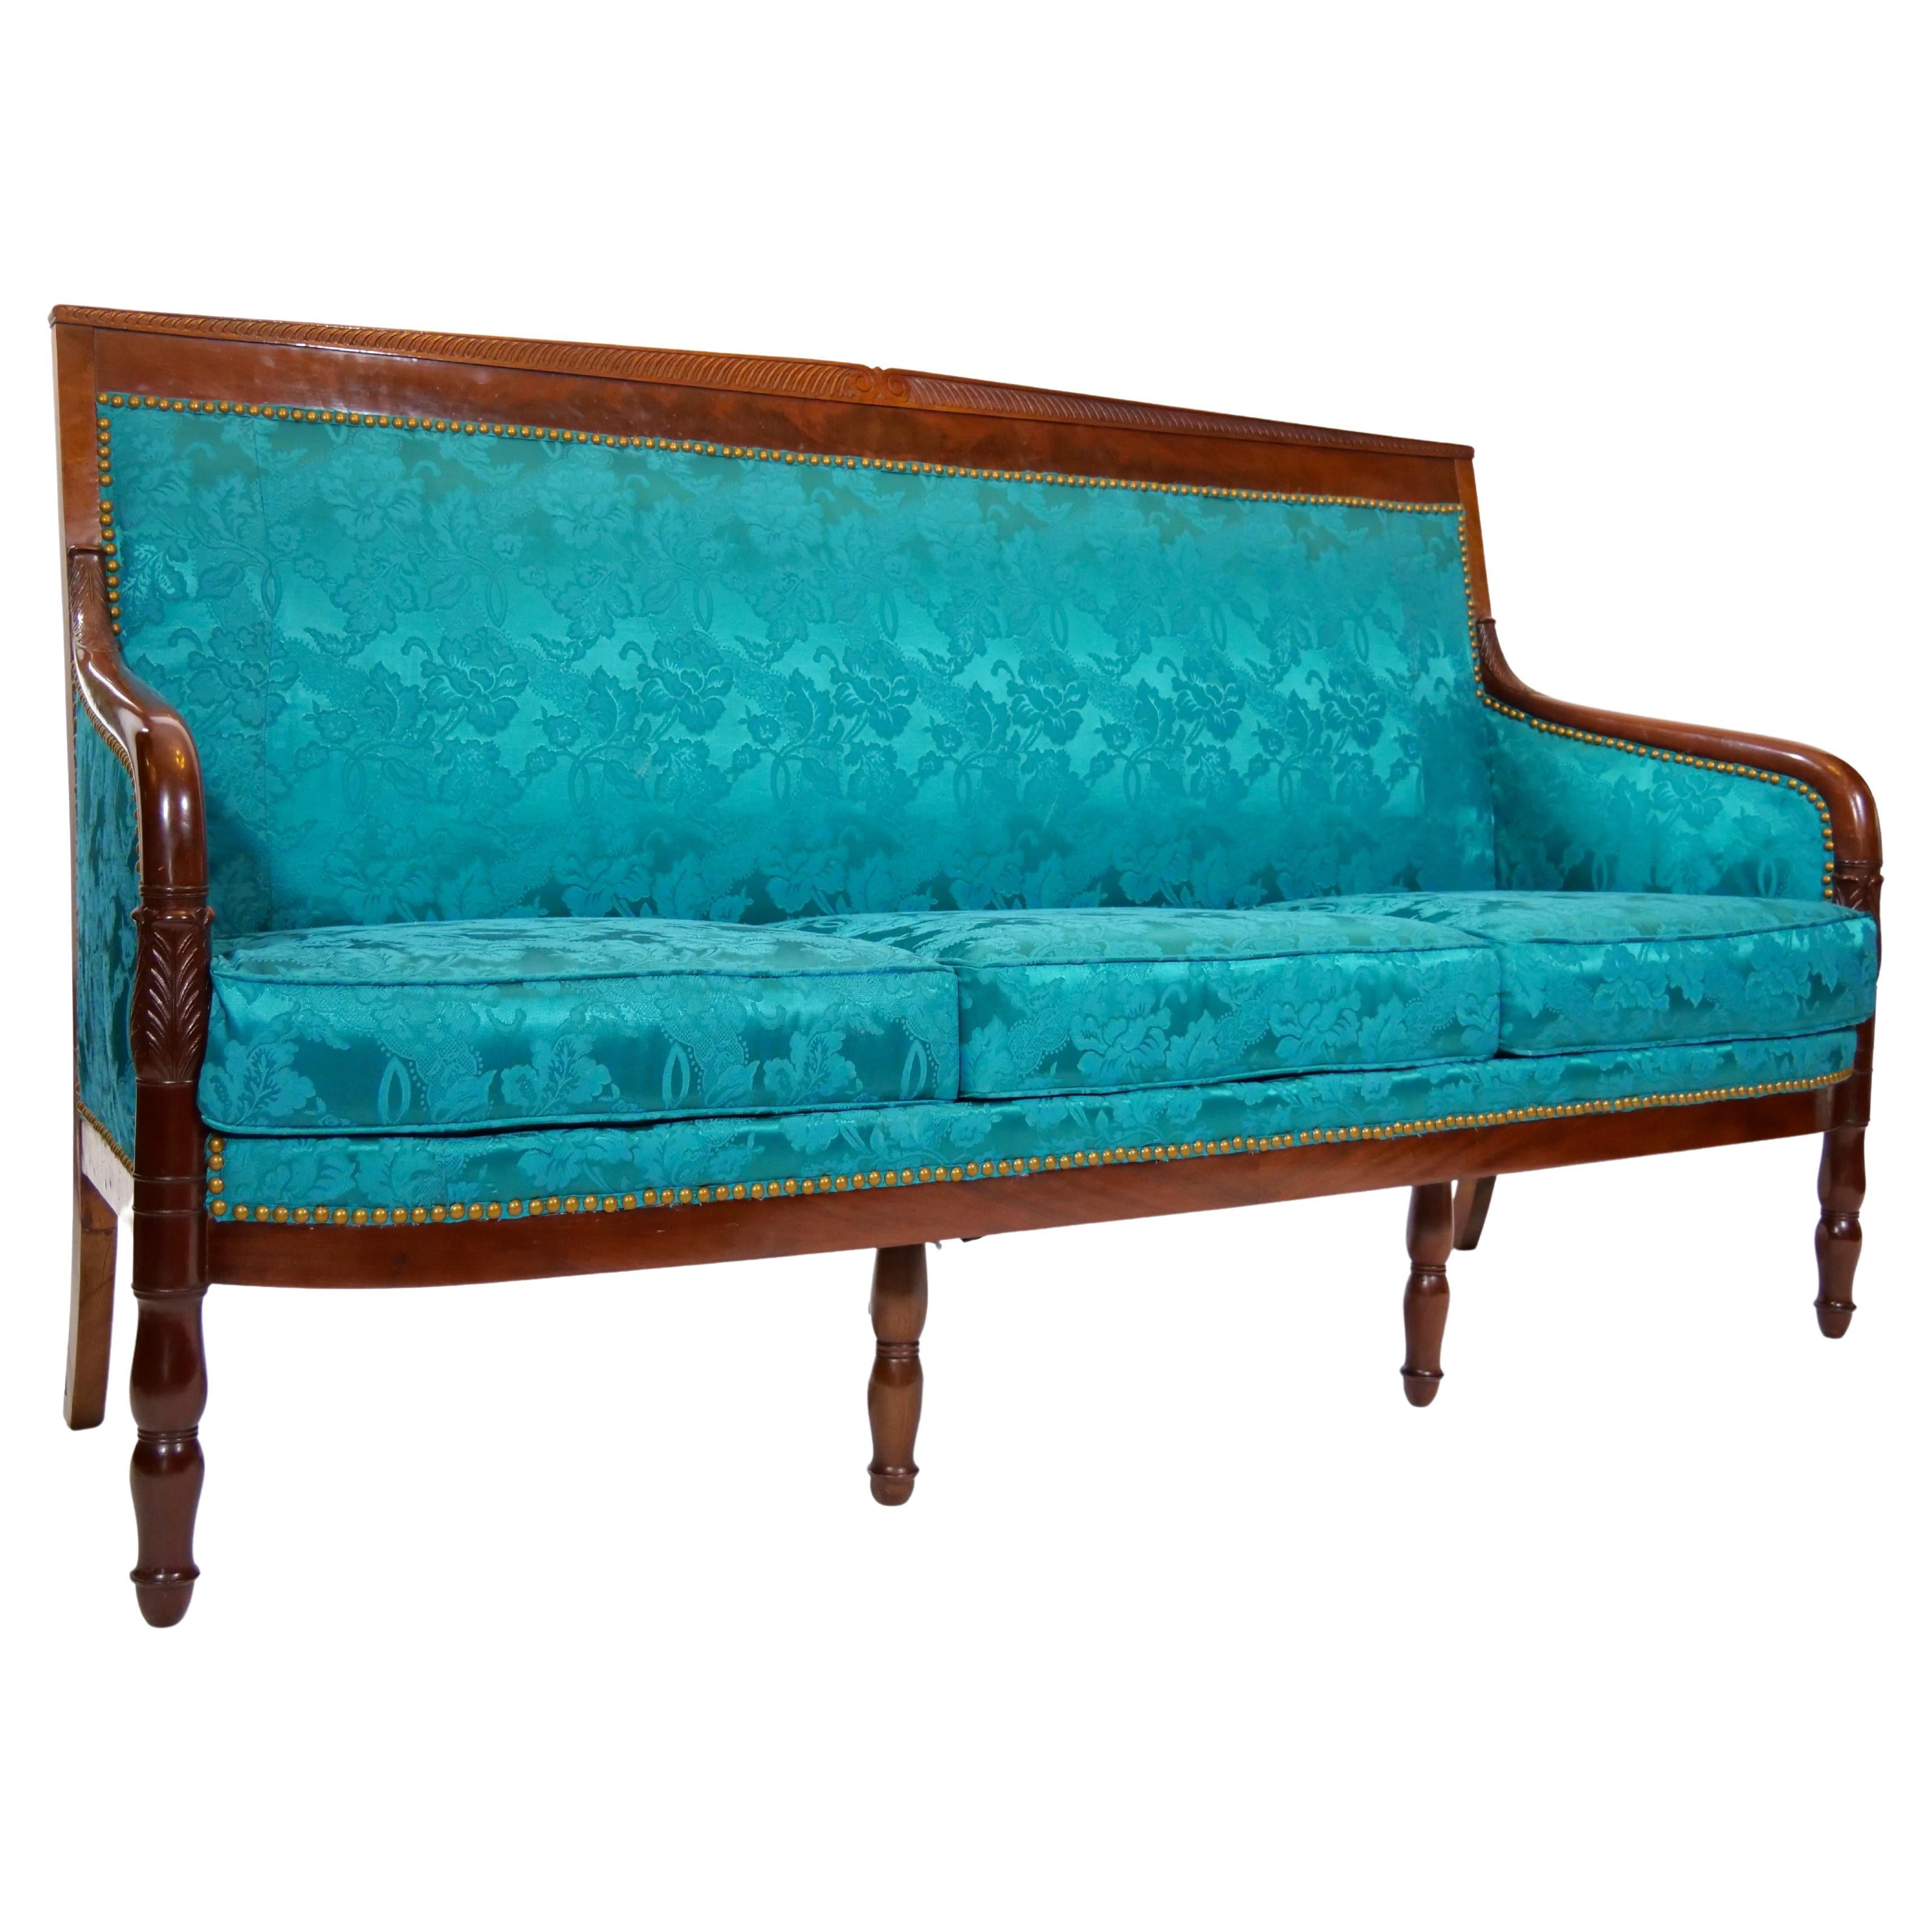 19th century Edwardian style mahogany wood framed upholstered settee or sofa. The settee / sofa is in great antique condition. Signed and dated underneath by the maker. Immaculate upholstery. Minor wear consistent with age / use. The settee / sofa